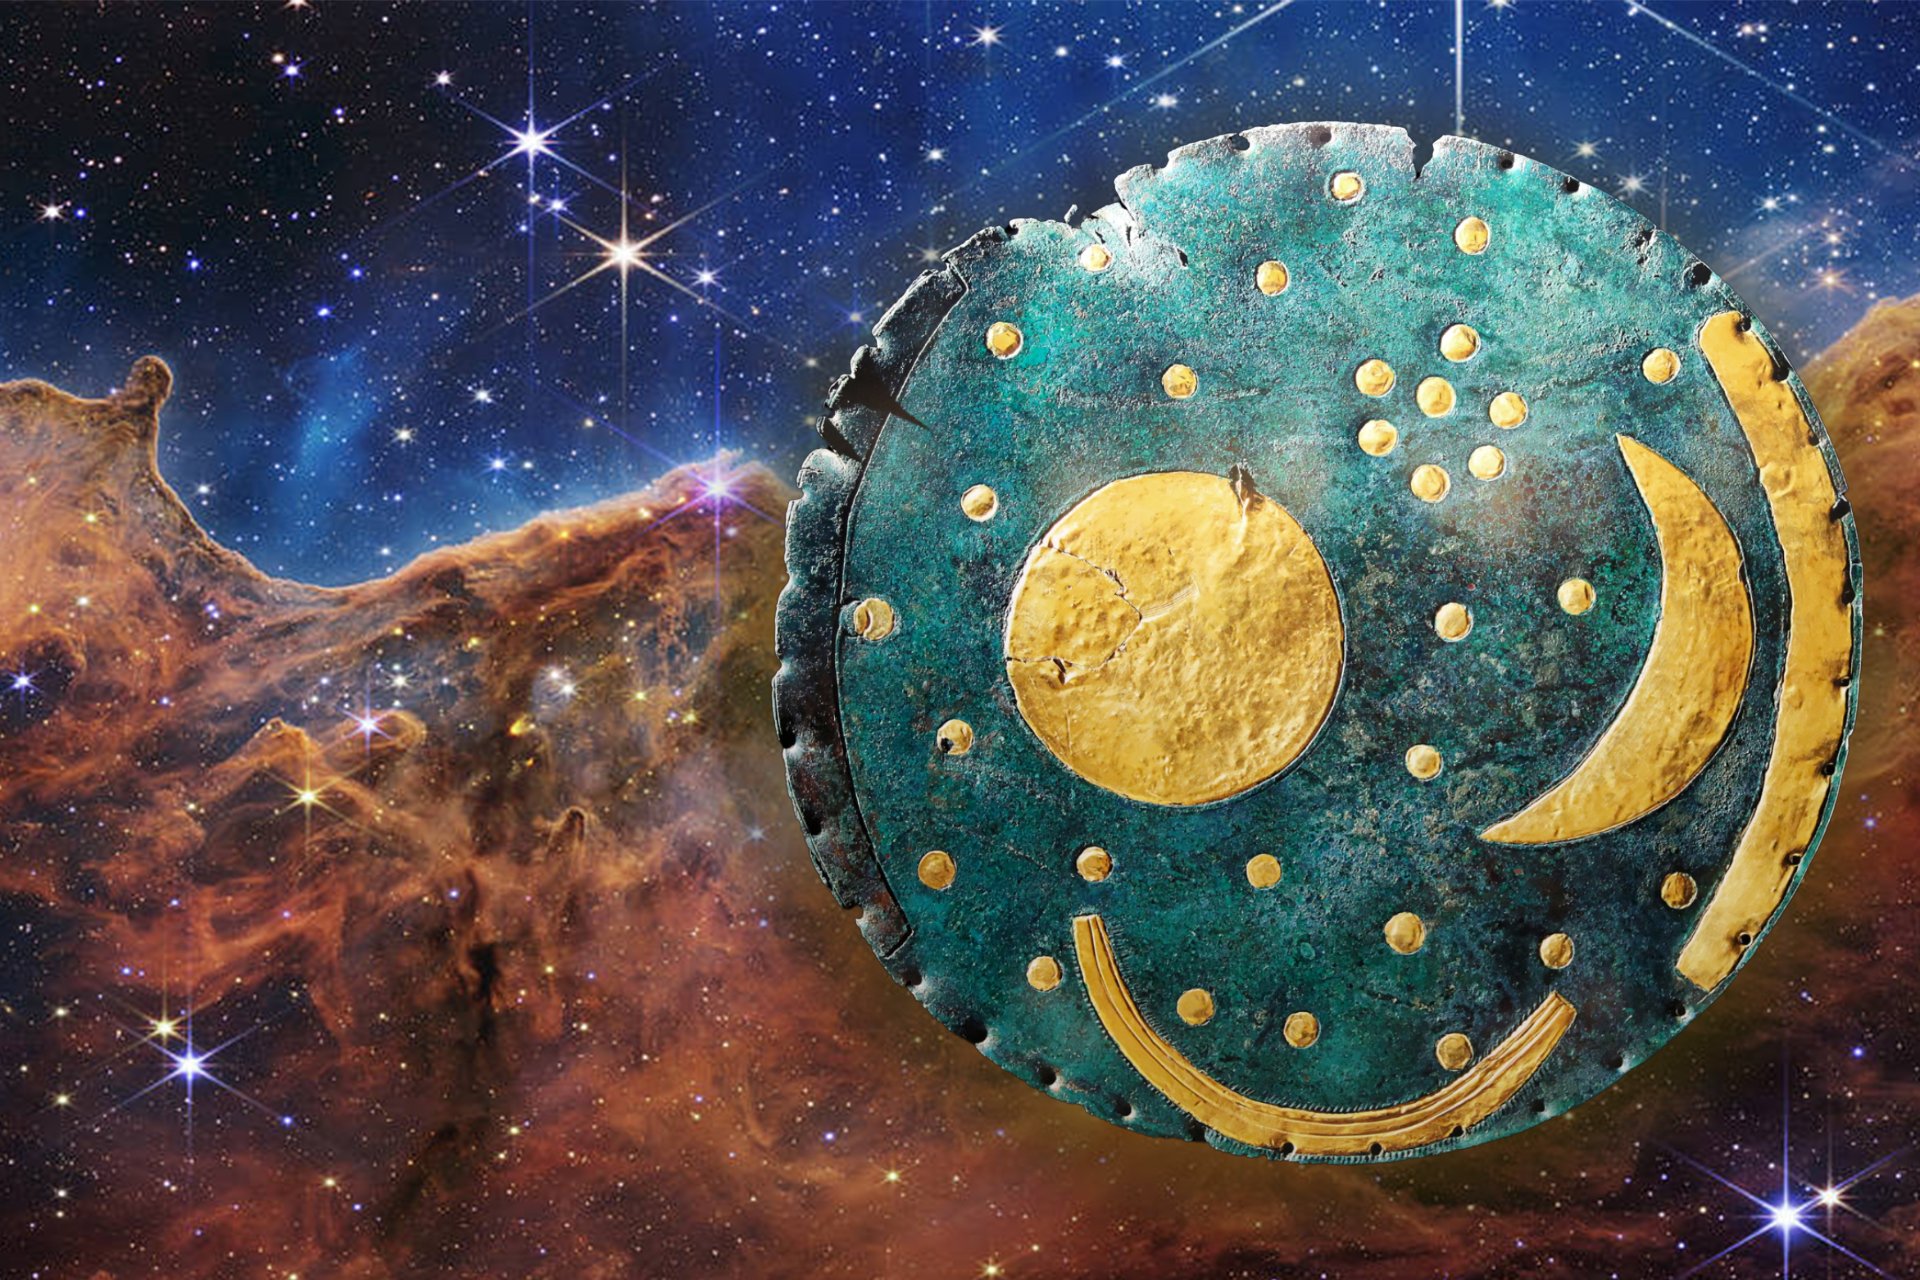 Collage of the first image from the James Webb Space Telescope of Carina Nebula and The Nebra Sky Disk – a shield with a crescent moon and stars on a starry night sky background.